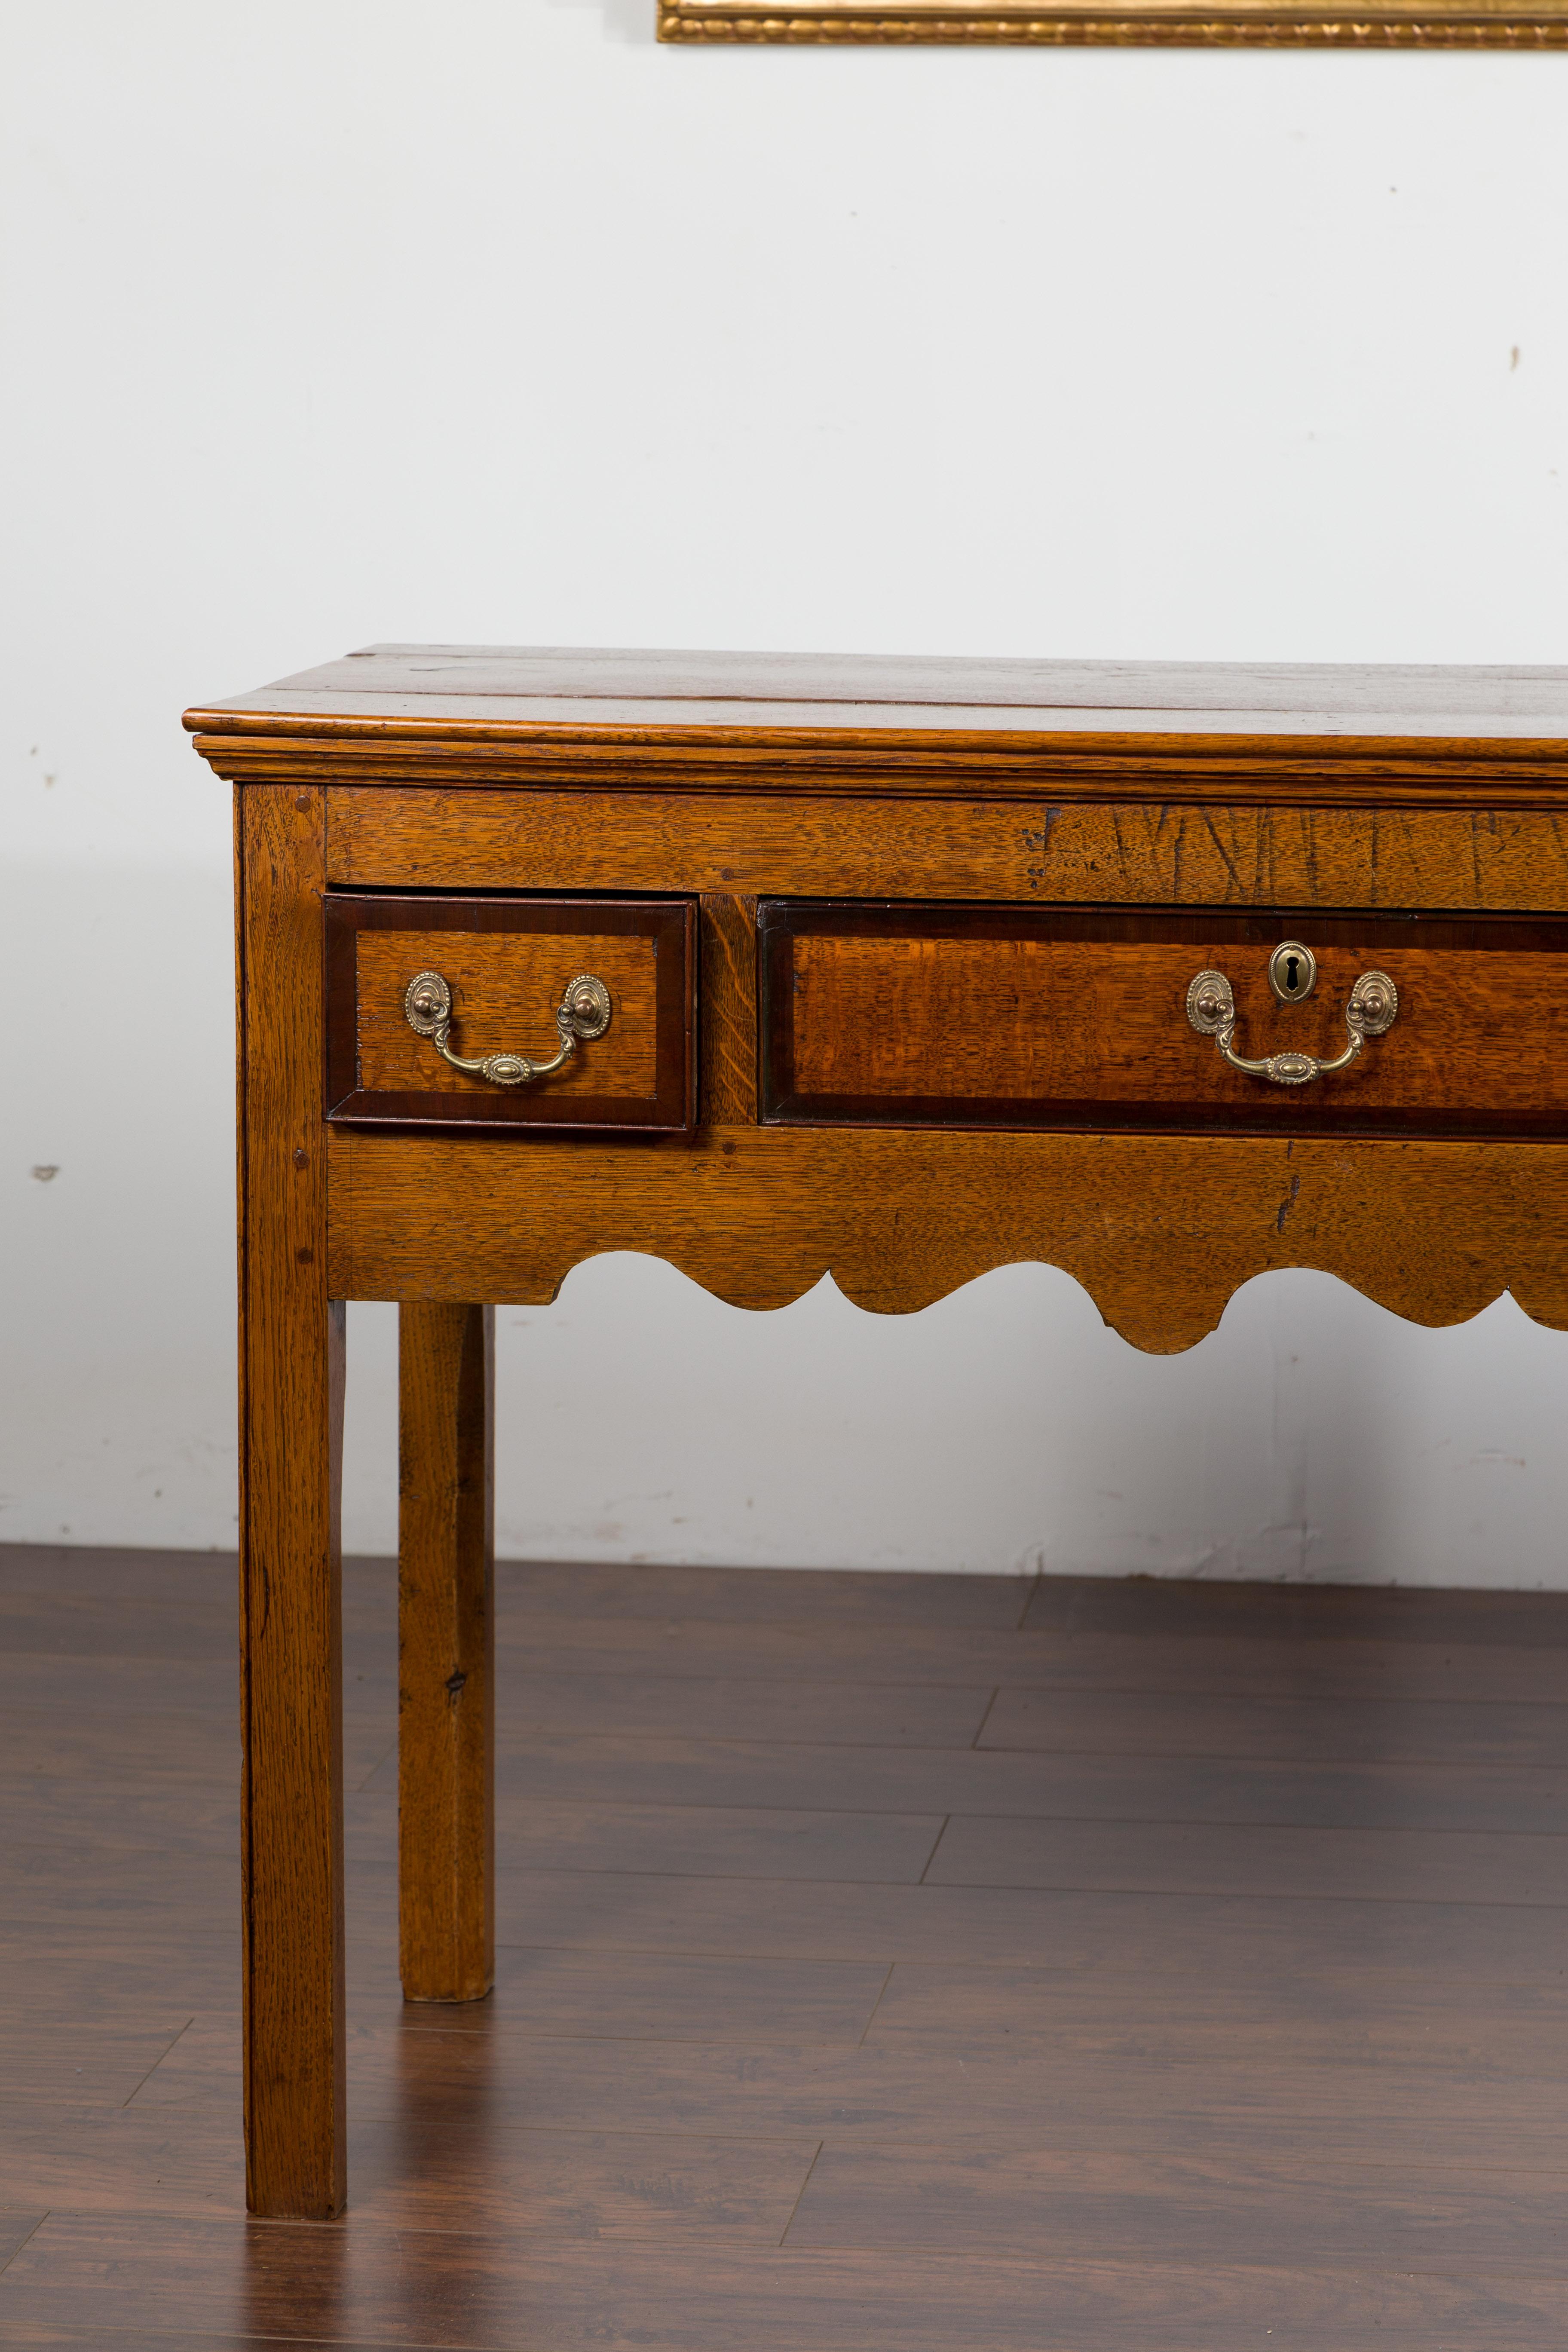 English 1870s Oak Dresser Base with Two-Toned Drawers and Scalloped Apron 1